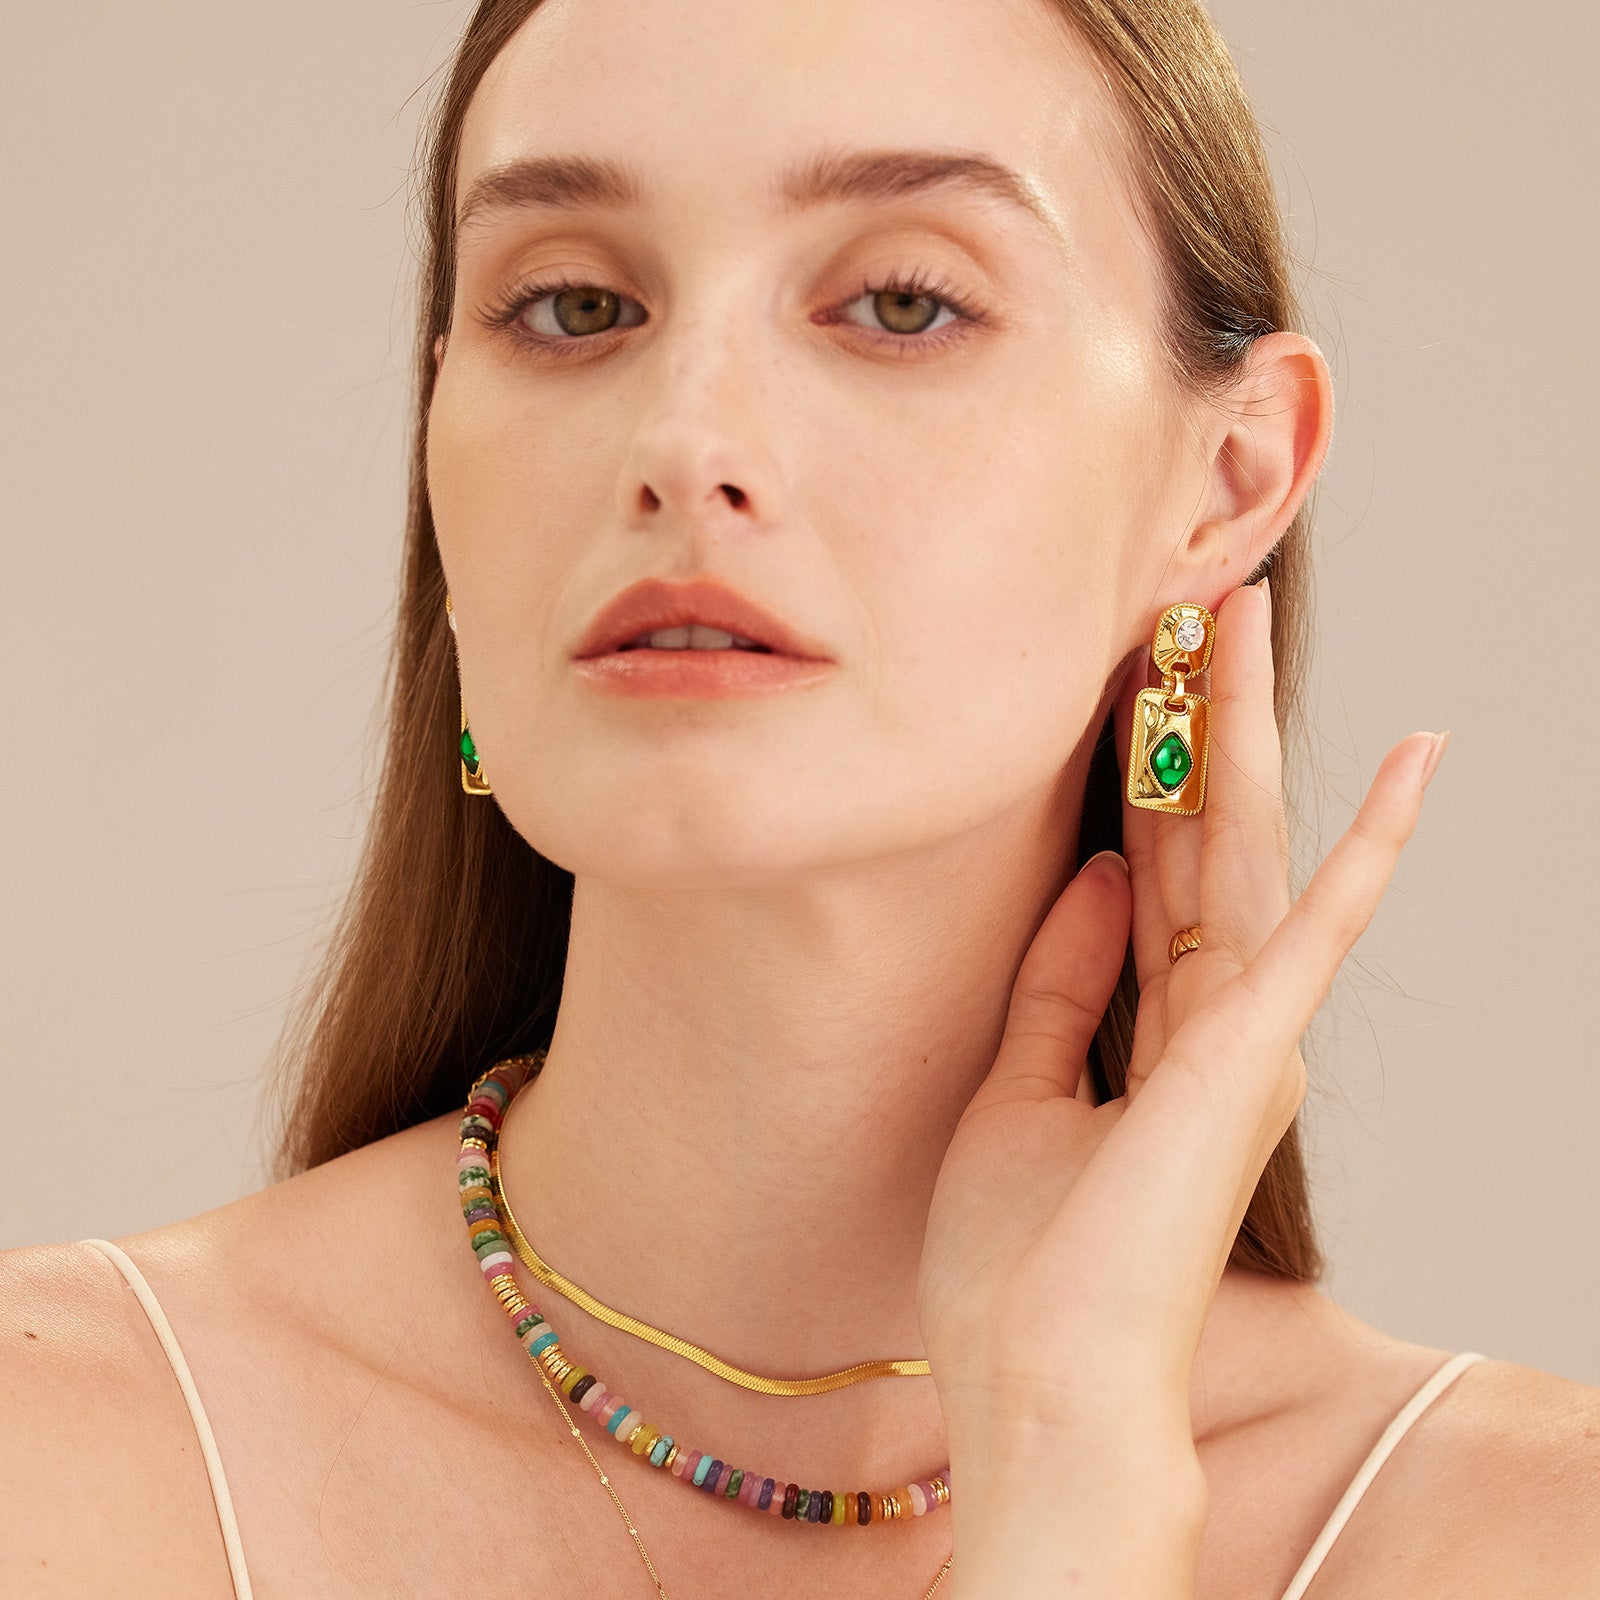 Gemstone Charm Hoop Earrings, featuring chic and charming gemstone accents, these hoops elevate your style with a blend of elegance and modern flair.